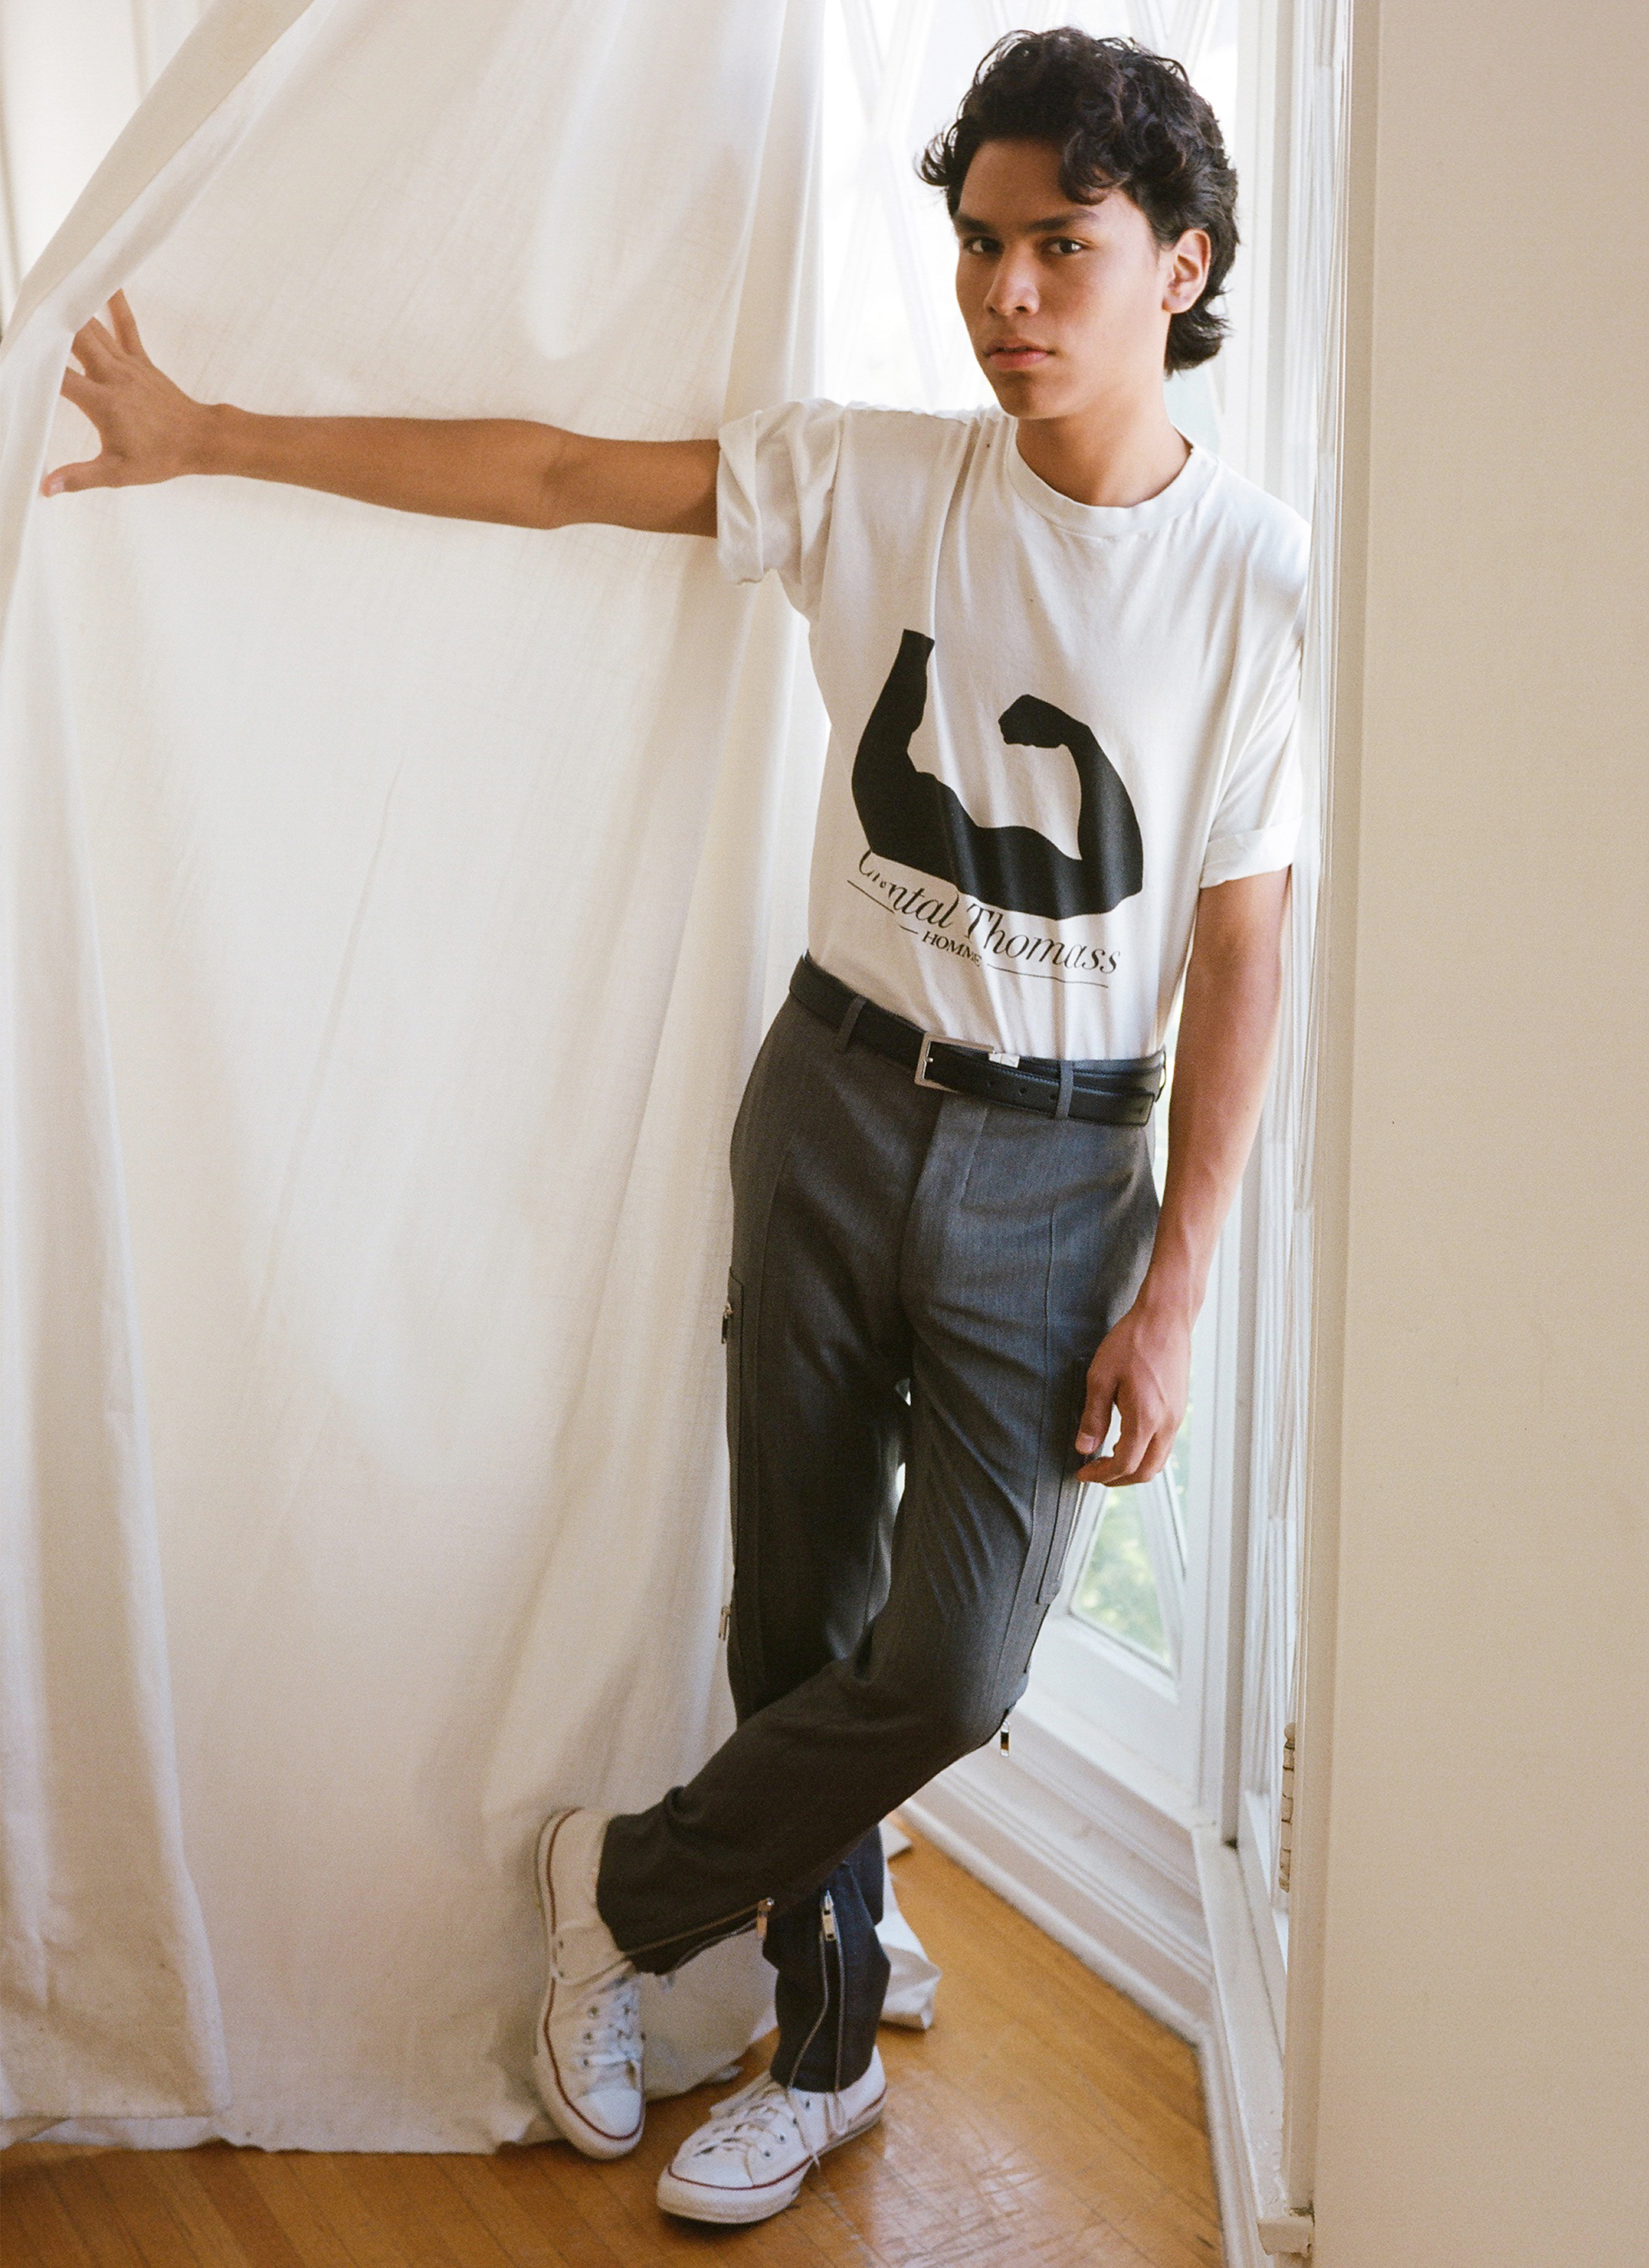 T-shirt, vintage Chantal Thomass from Chapel NYC. Trousers and belt by Dior Homme. Sneakers by Converse.